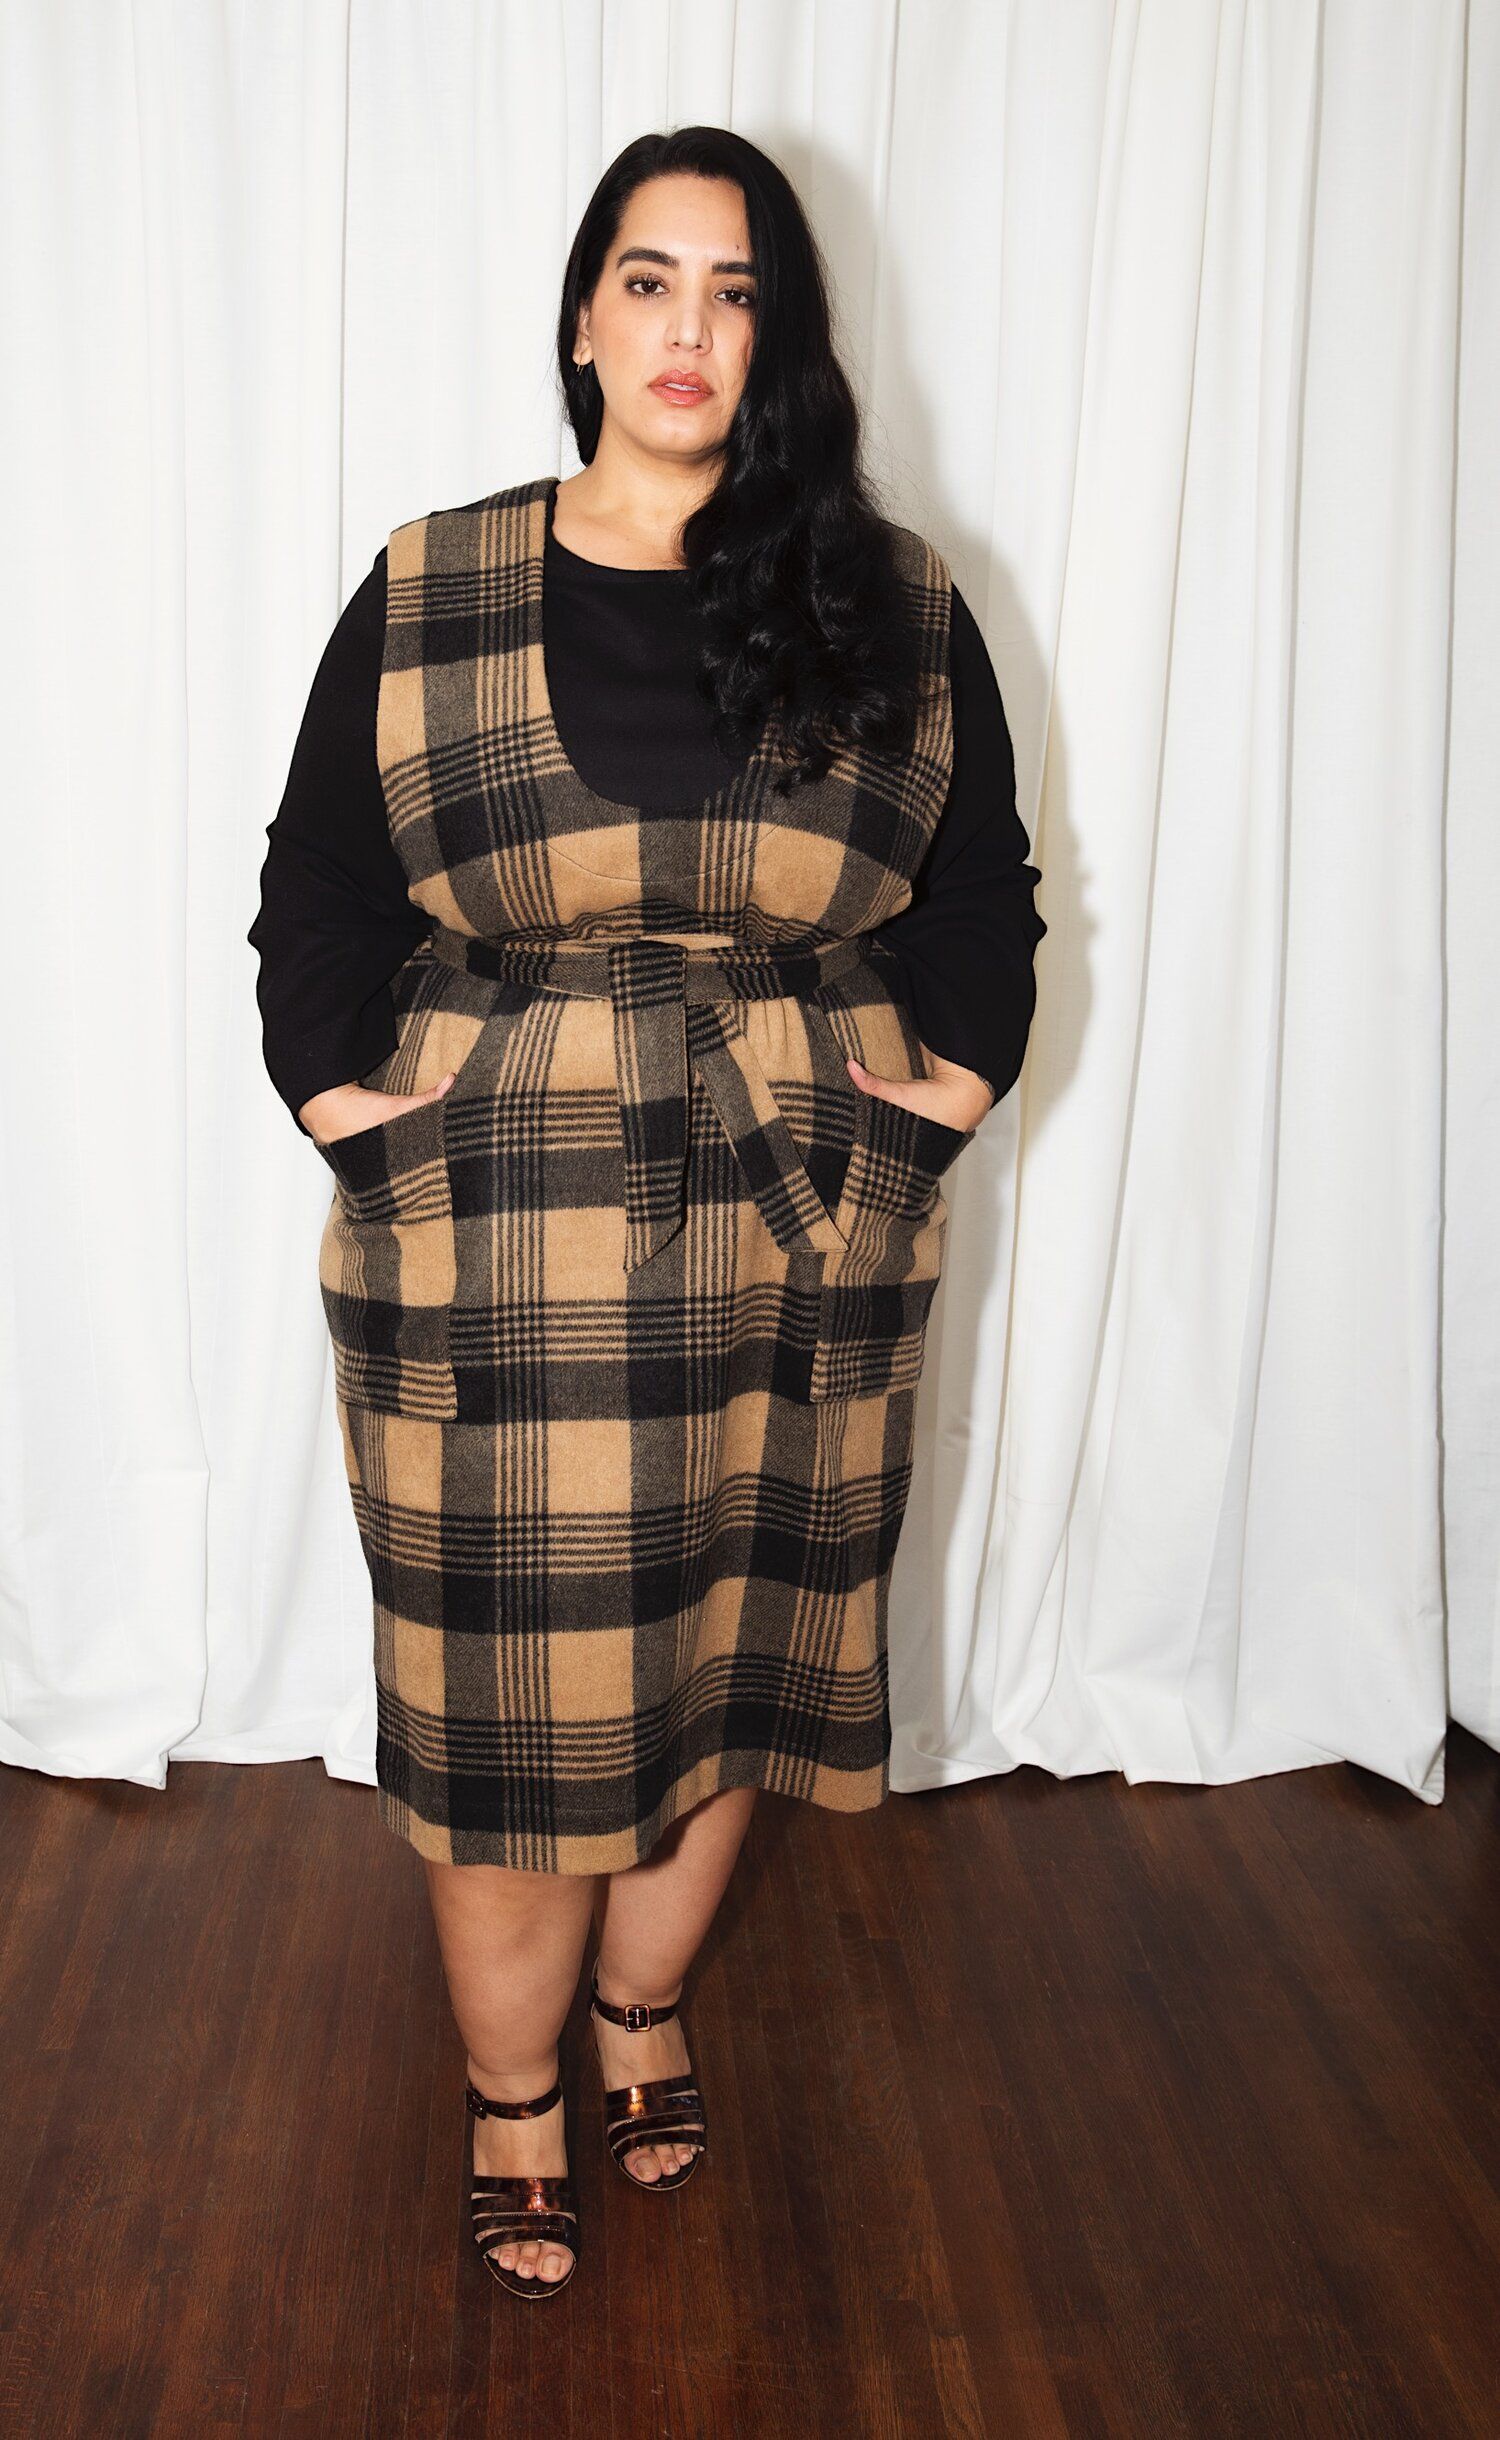 Plus Size Clothing - Buyers Guide  Plus size fashion, Curvy girl